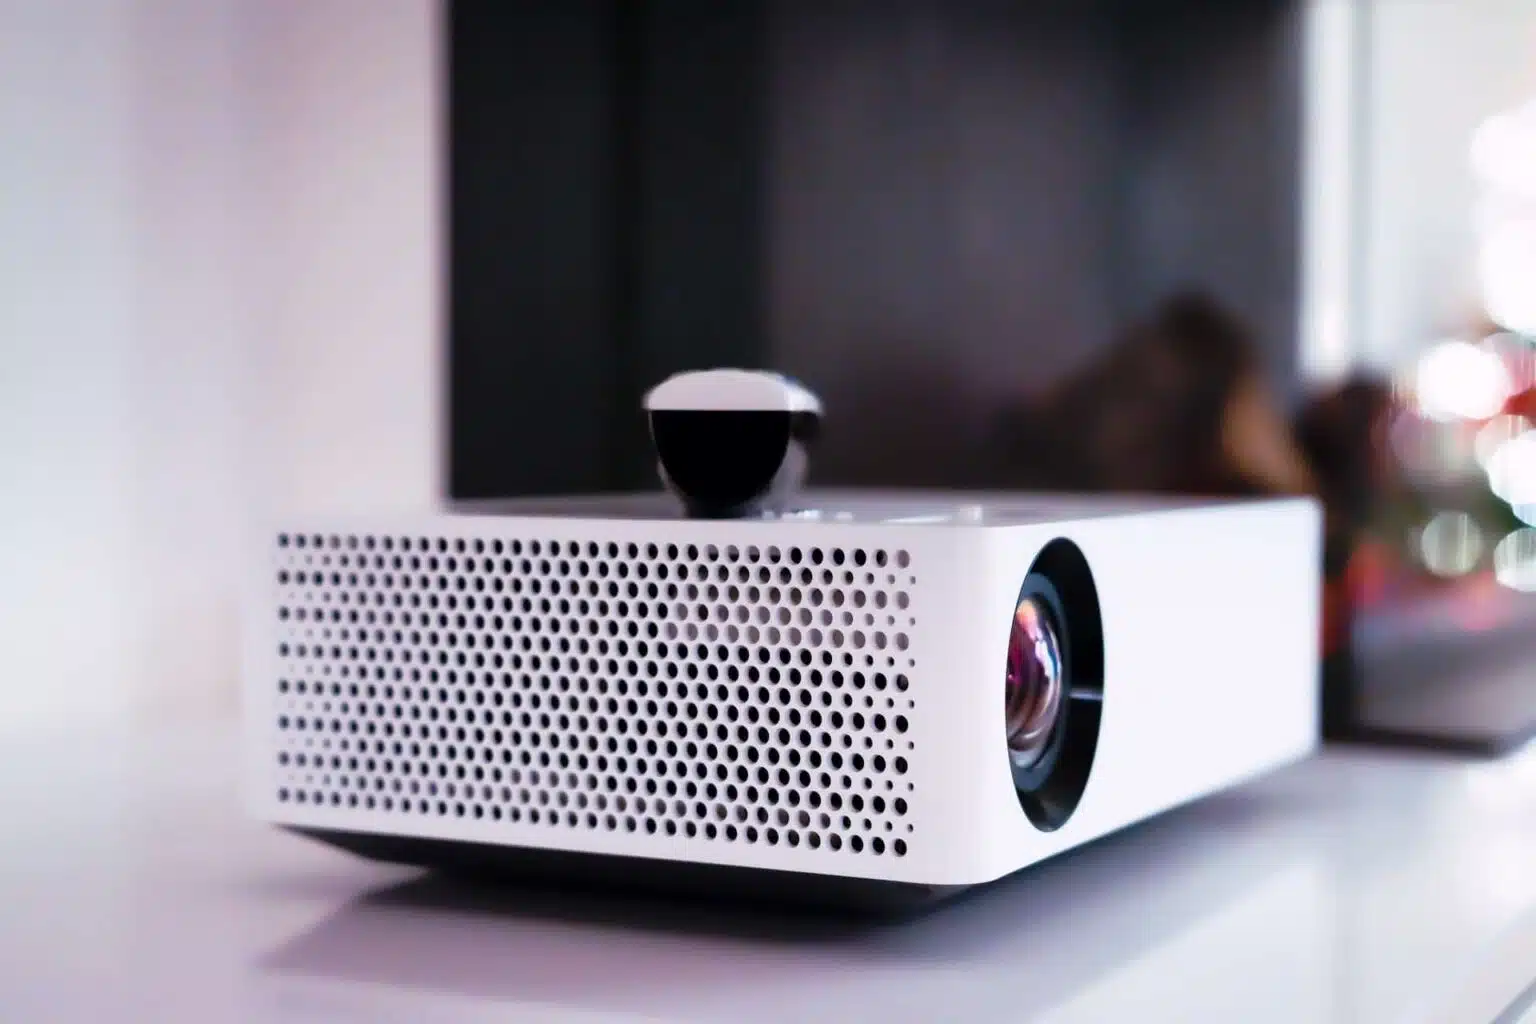 How To Make A Projector Quieter